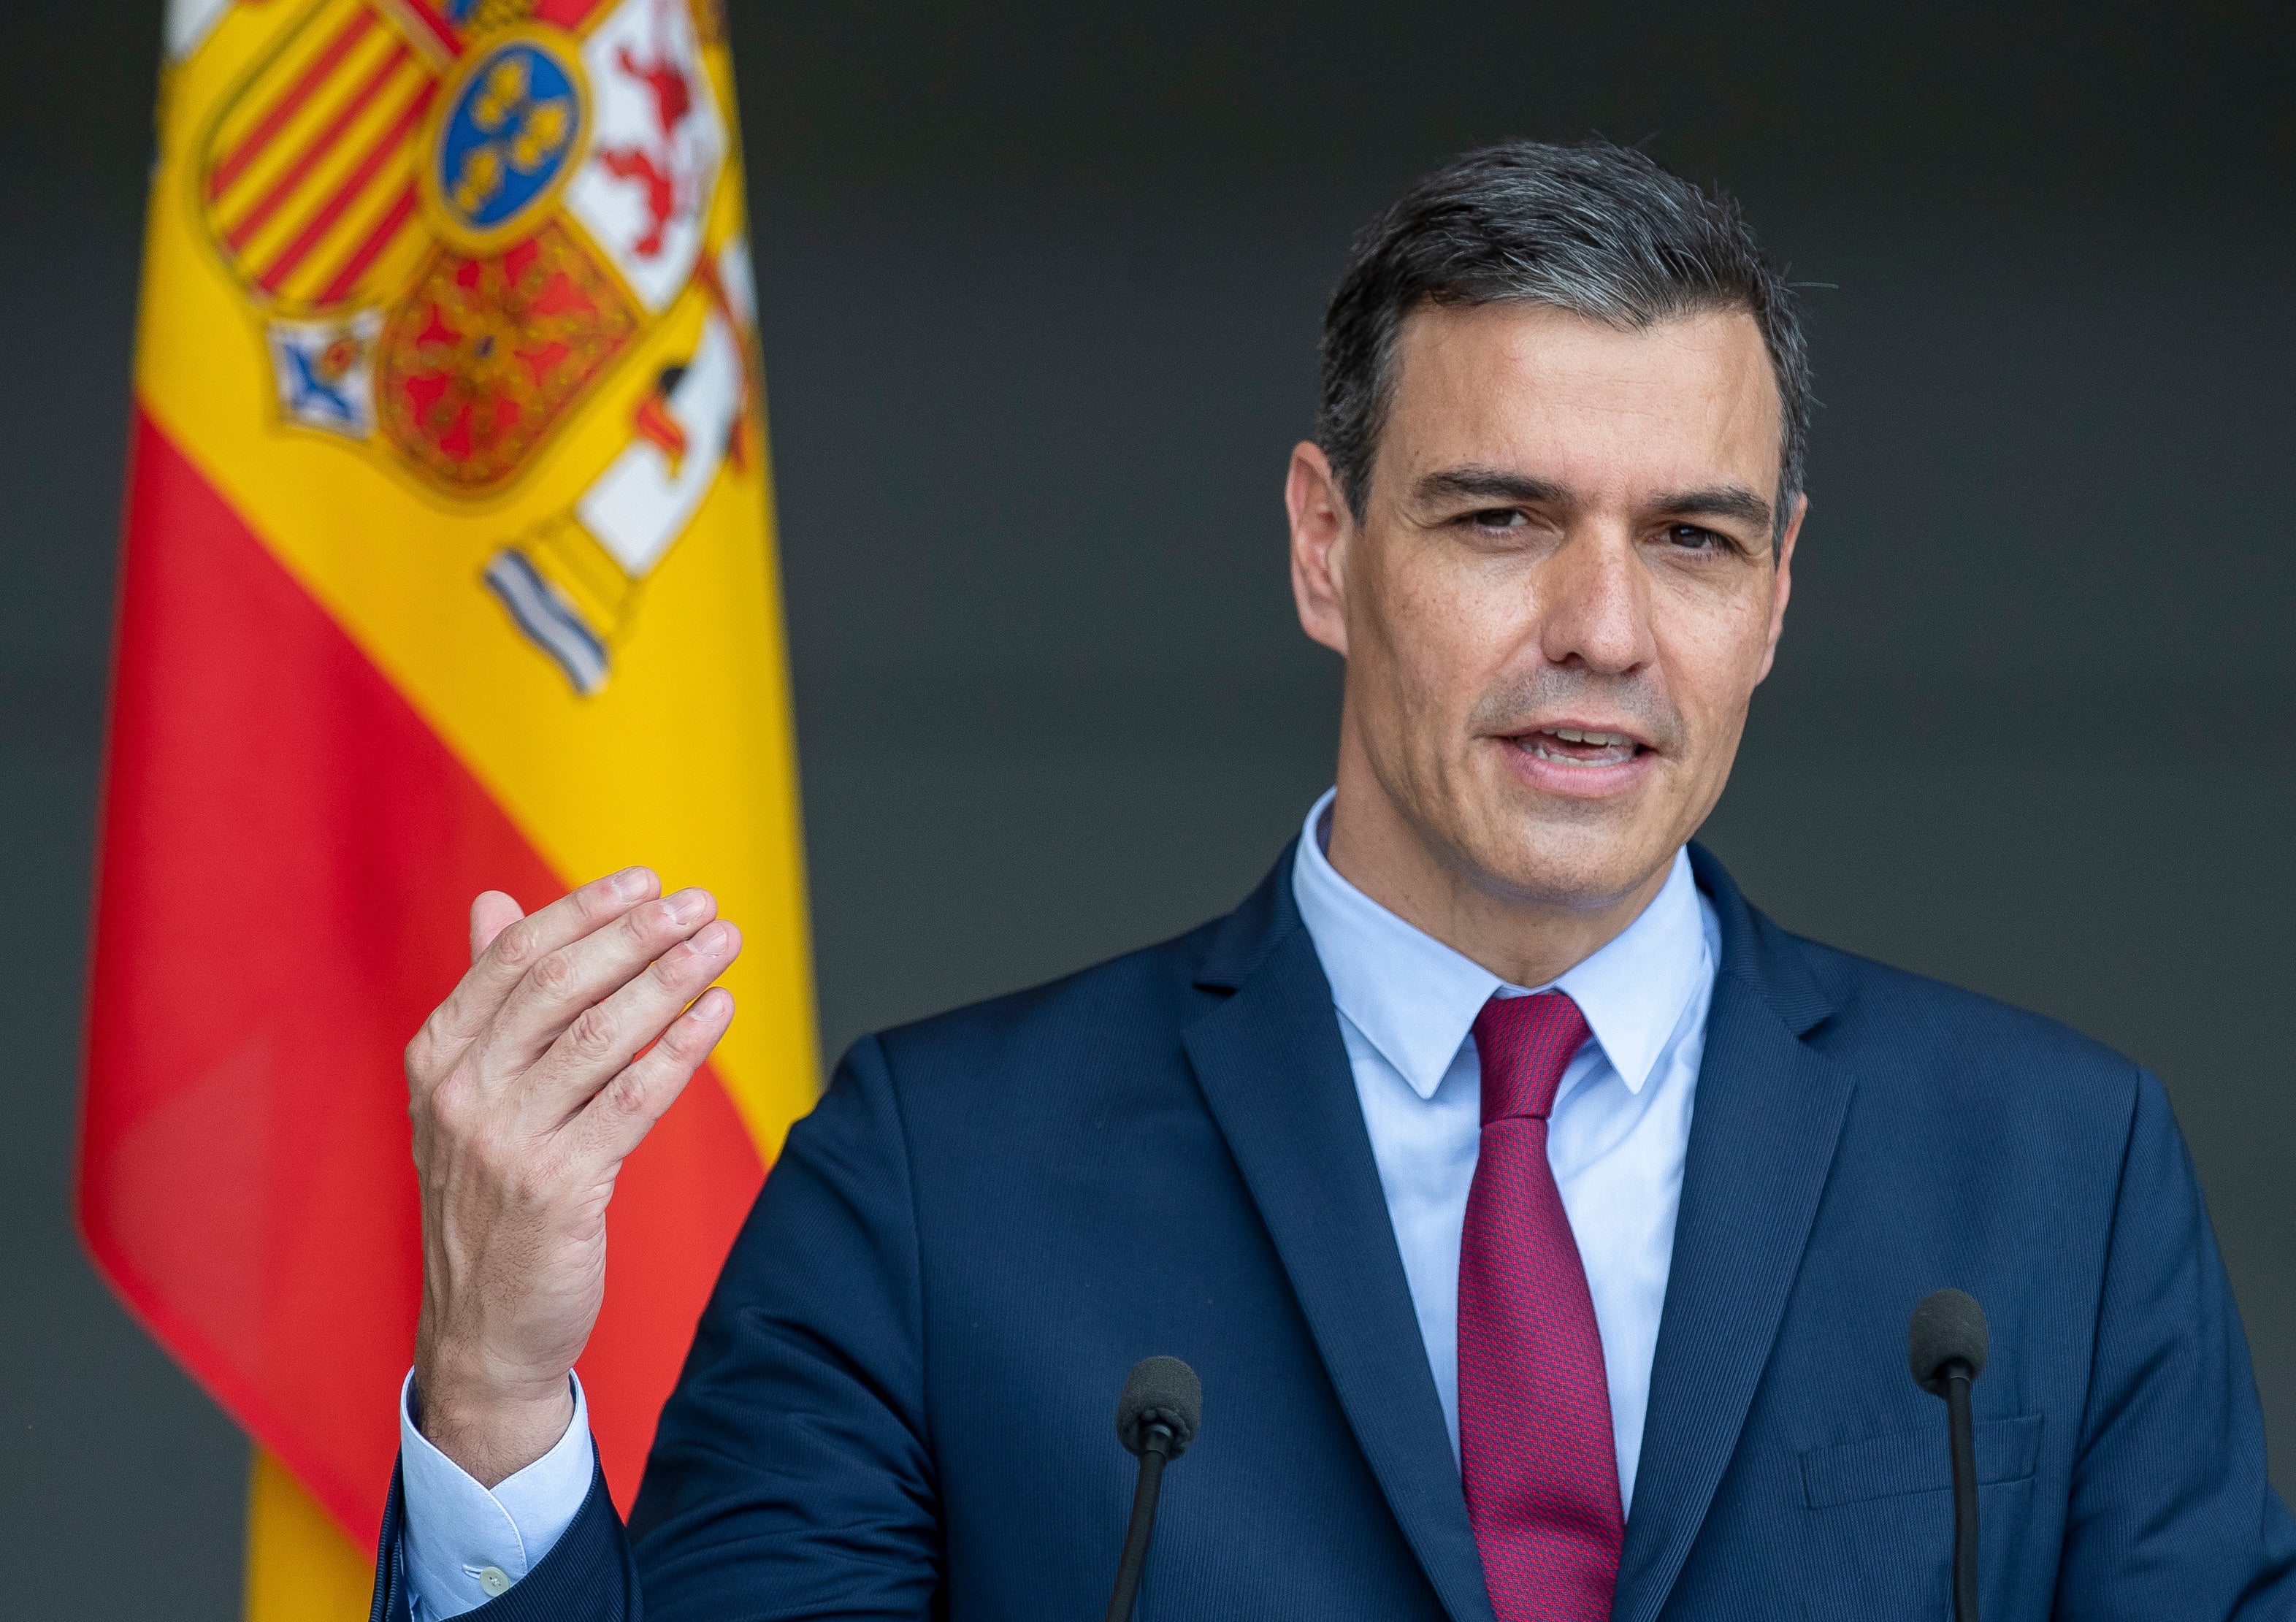 Spain's Prime Minister Pedro Sanchez answers questions during a meeting with the press